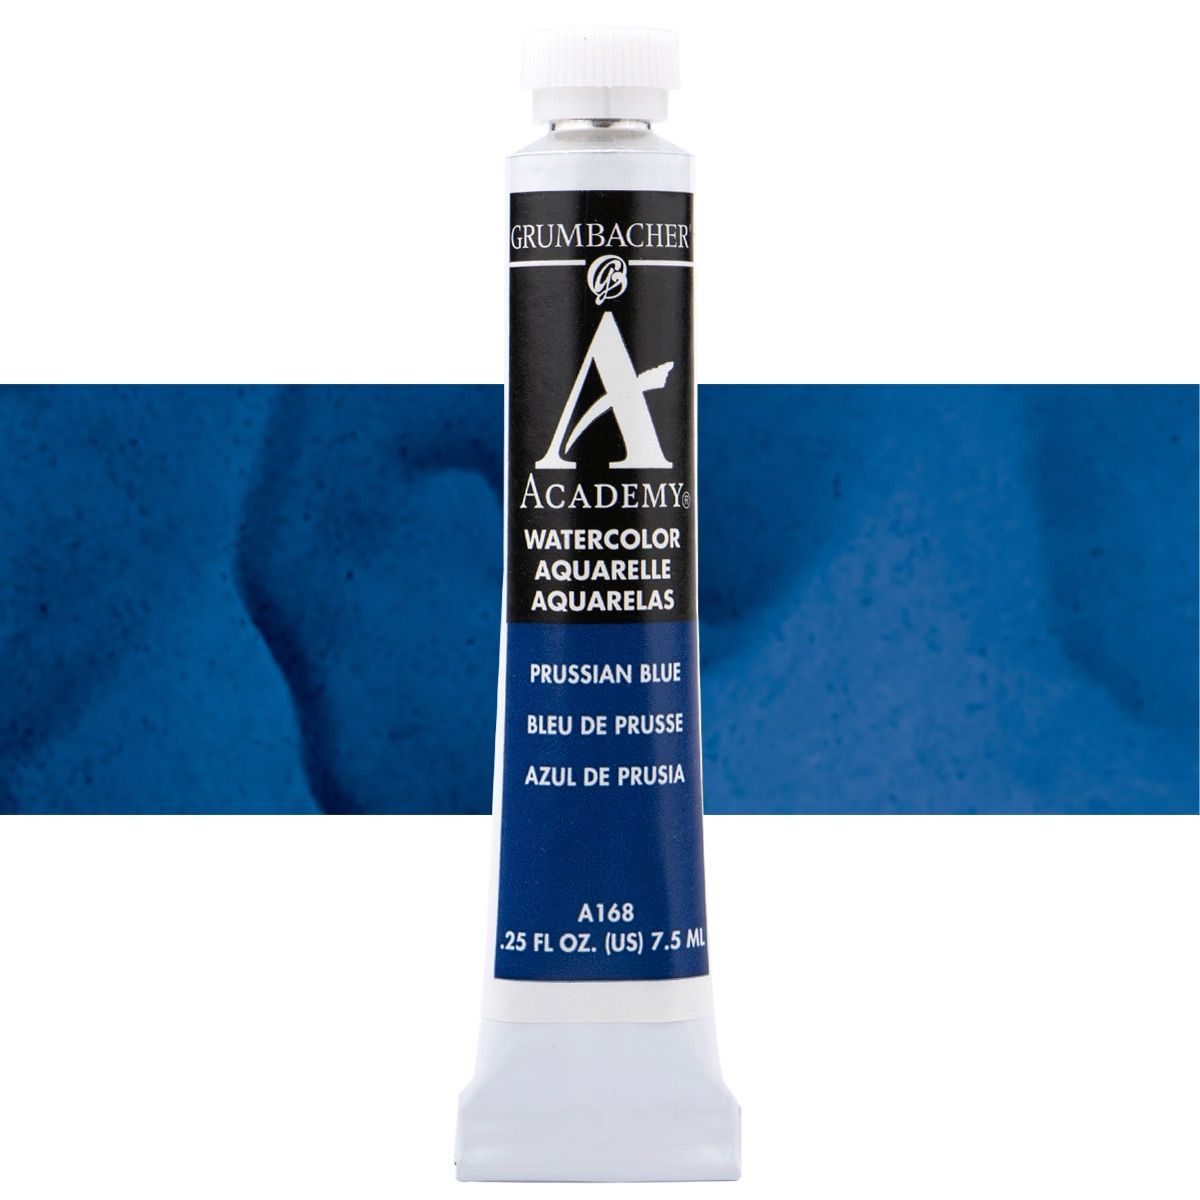 Grumbacher Academy Watercolor 7.5 ml Tube - Prussian Blue